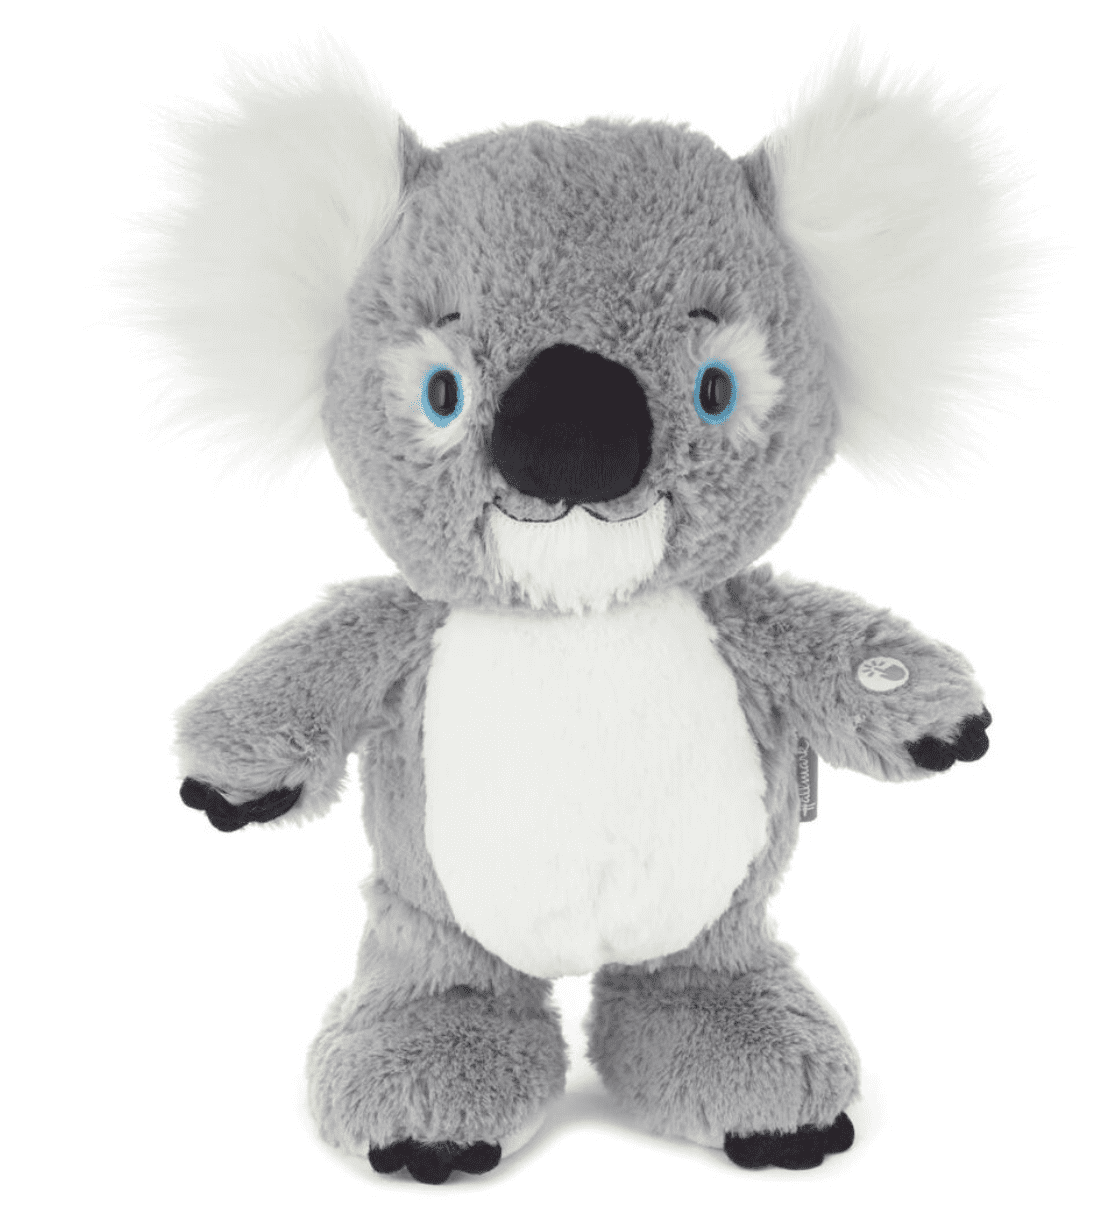 stuffed animals that move and make noise